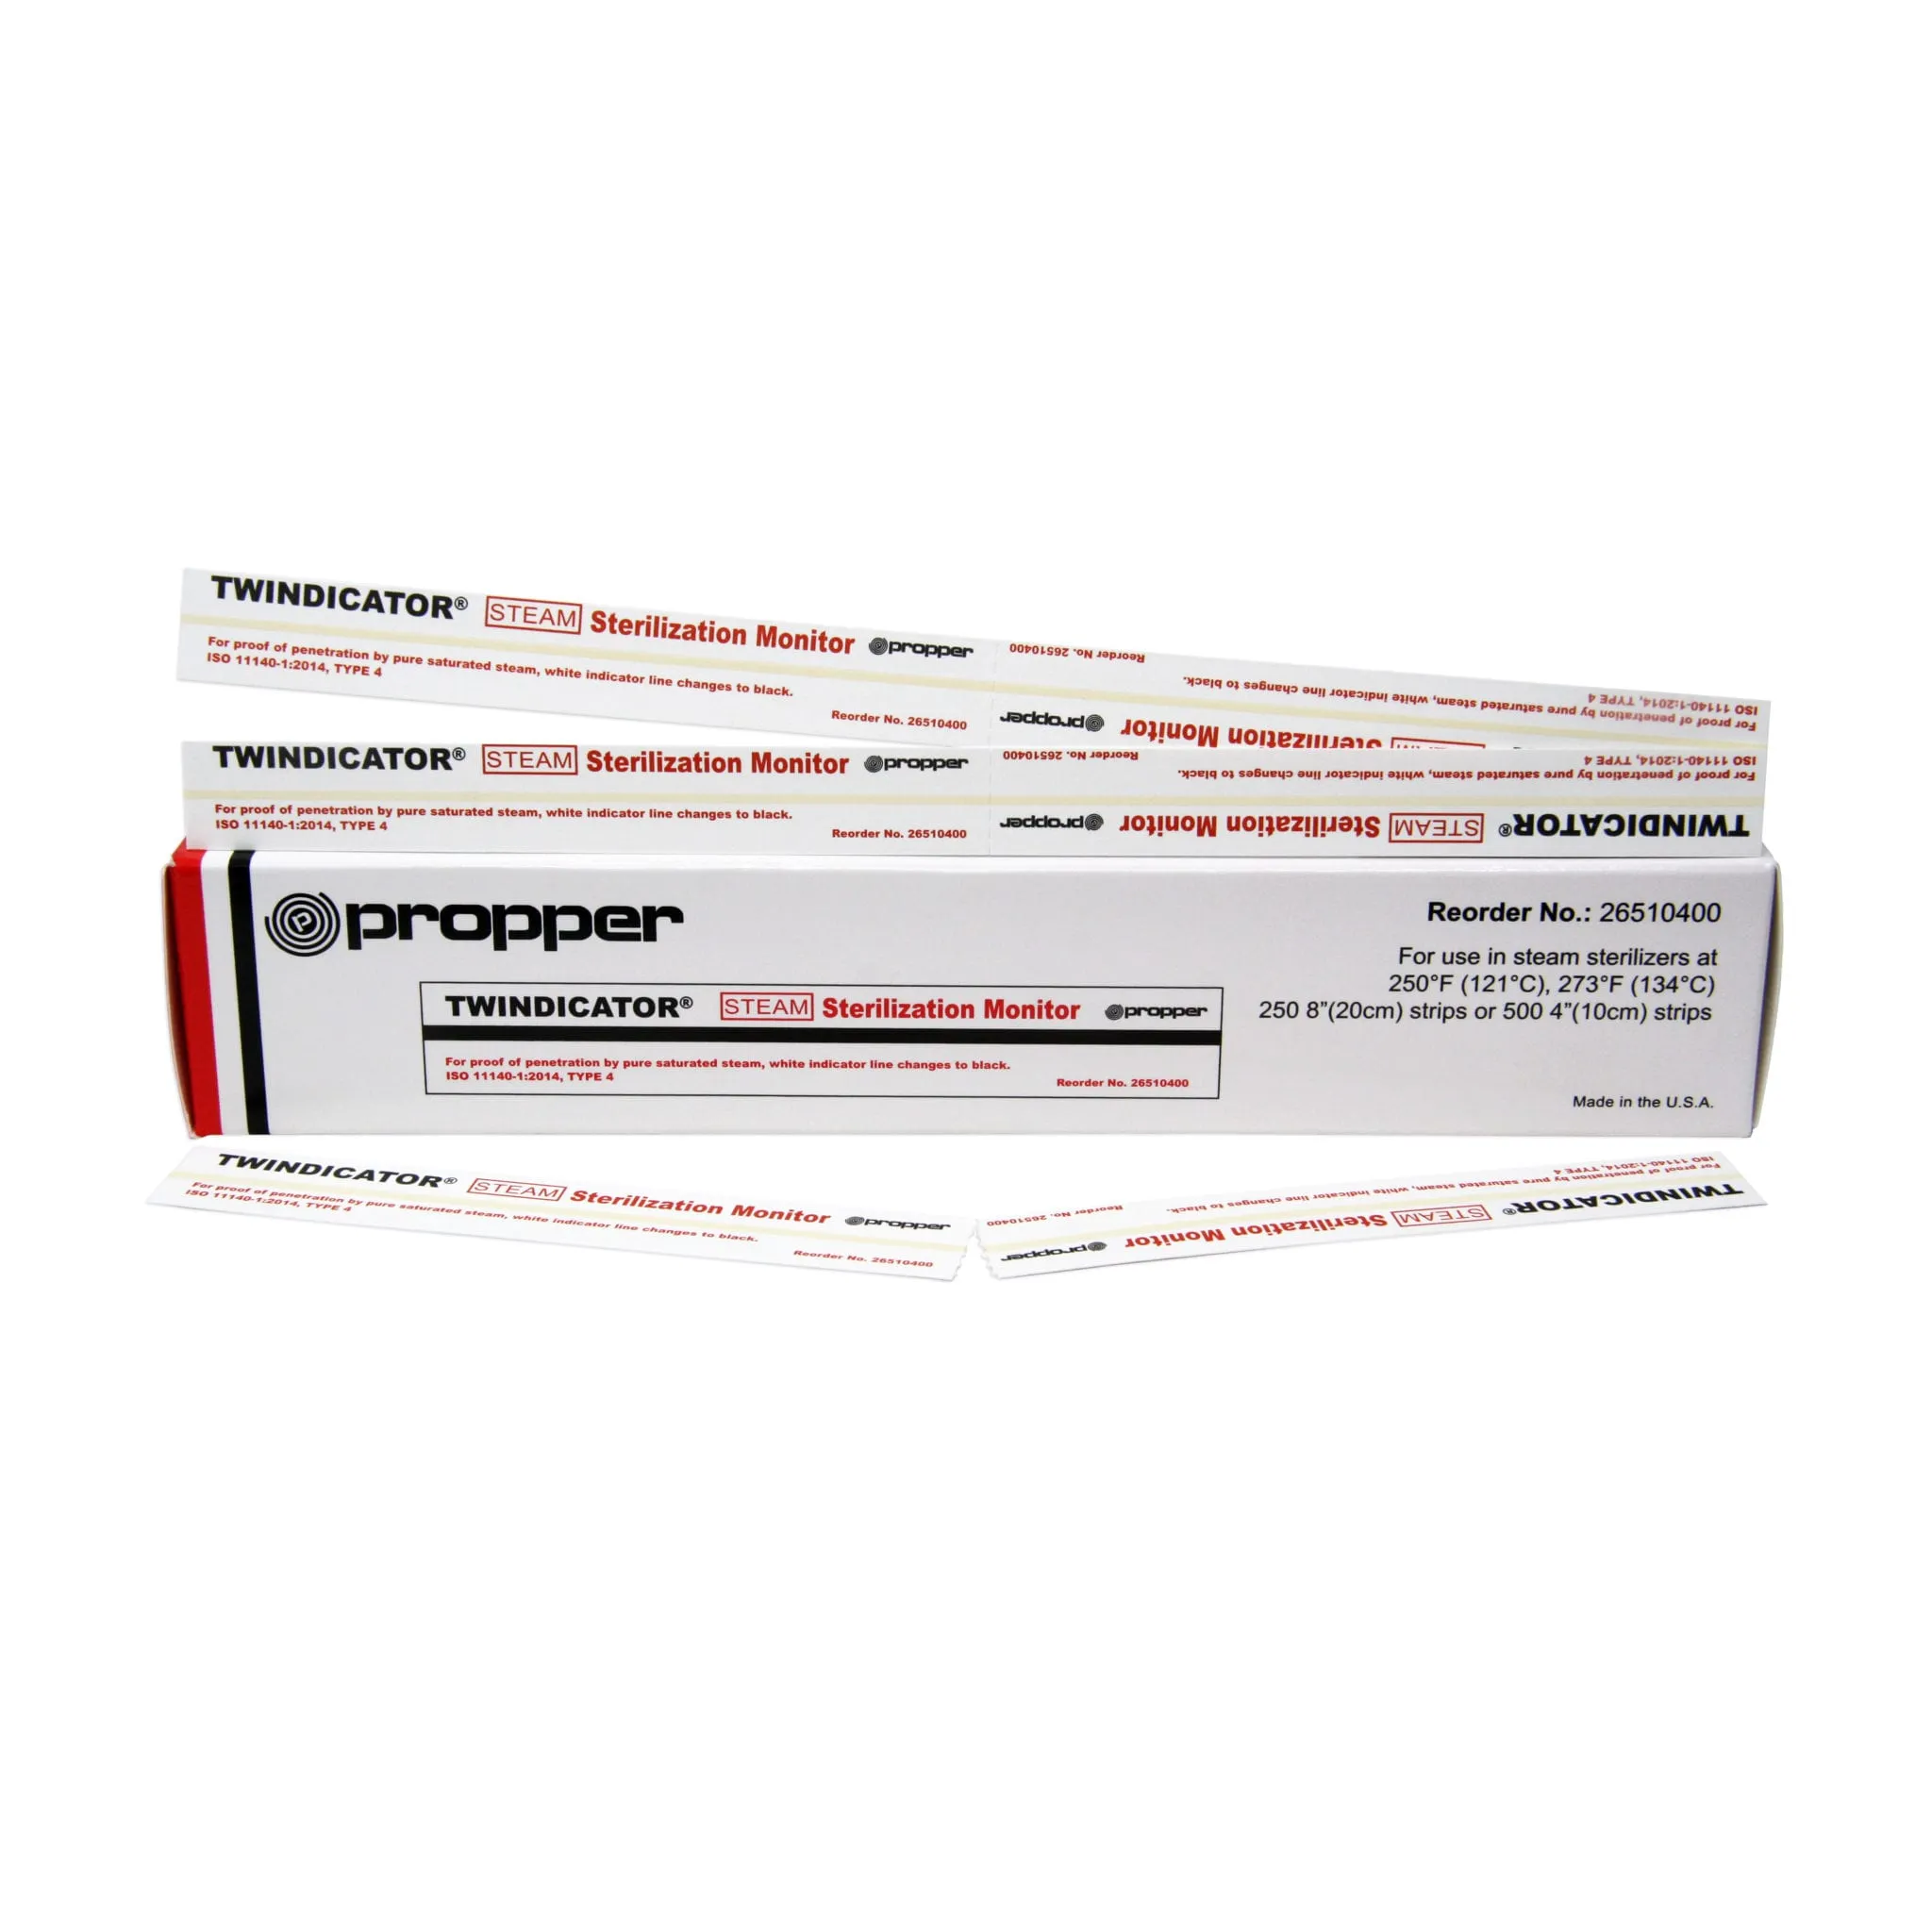 Propper Manufacturing - 26510400 - Twindicator  Chemical Indicator Strip, Steam Type 4 Perforated Indicator